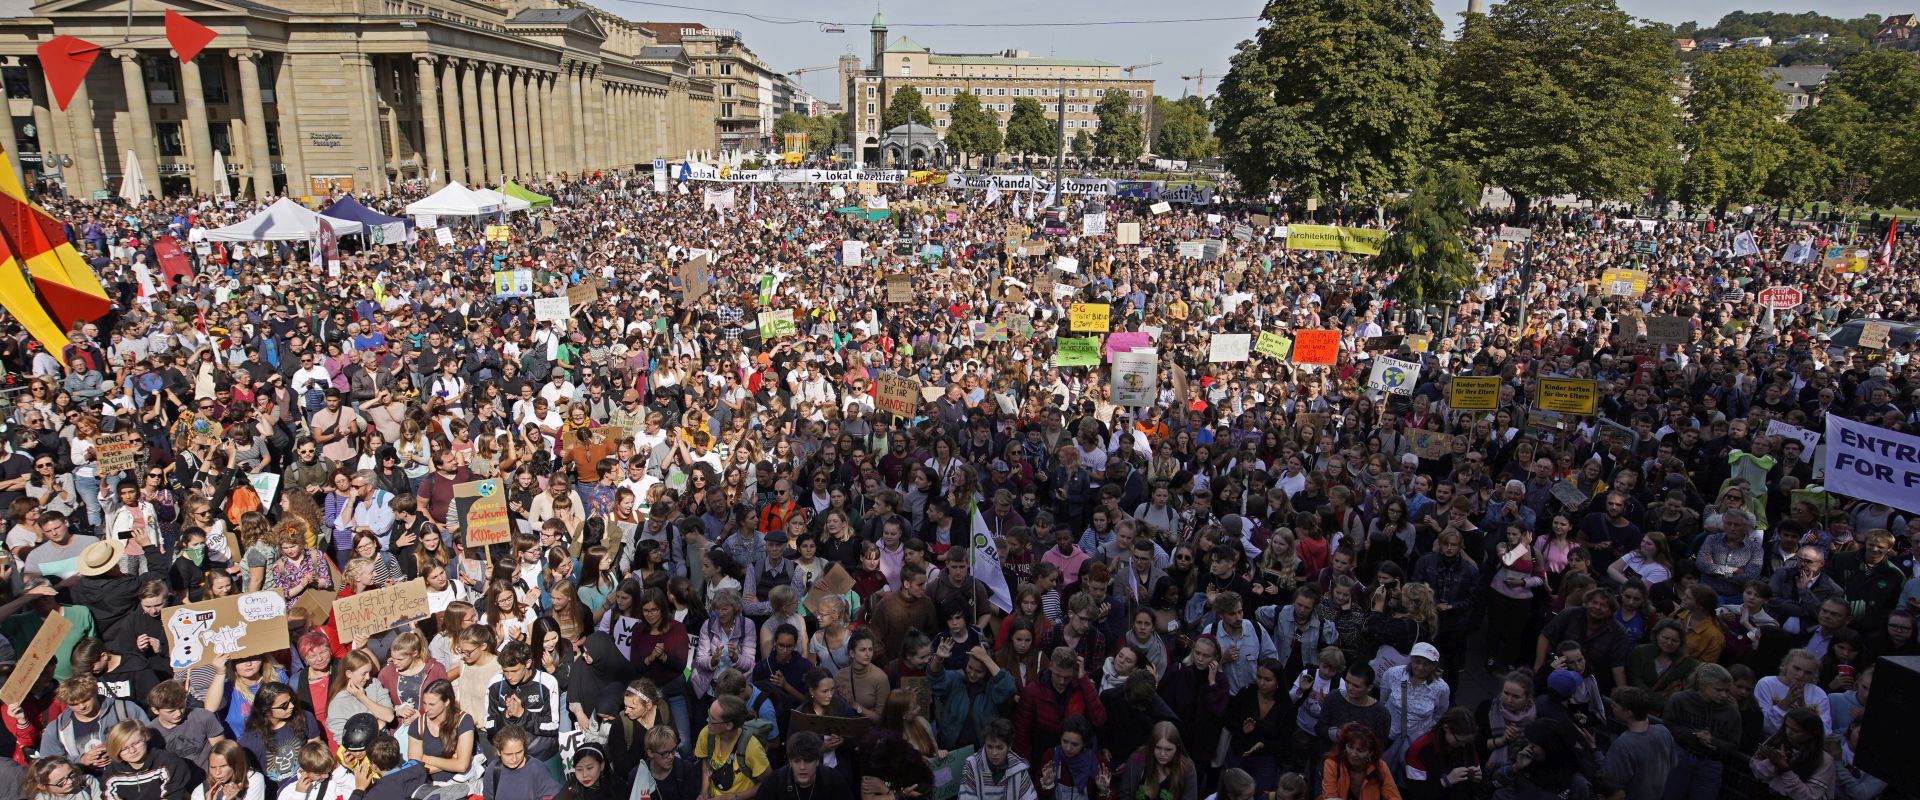 epa07855885 Students take part in a globale demonstration against climate change in Stuttgart, Germany, 20 September 2019. Millions of people around the world were taking part in protests demanding action on climate issues.  EPA/RONALD WITTEK